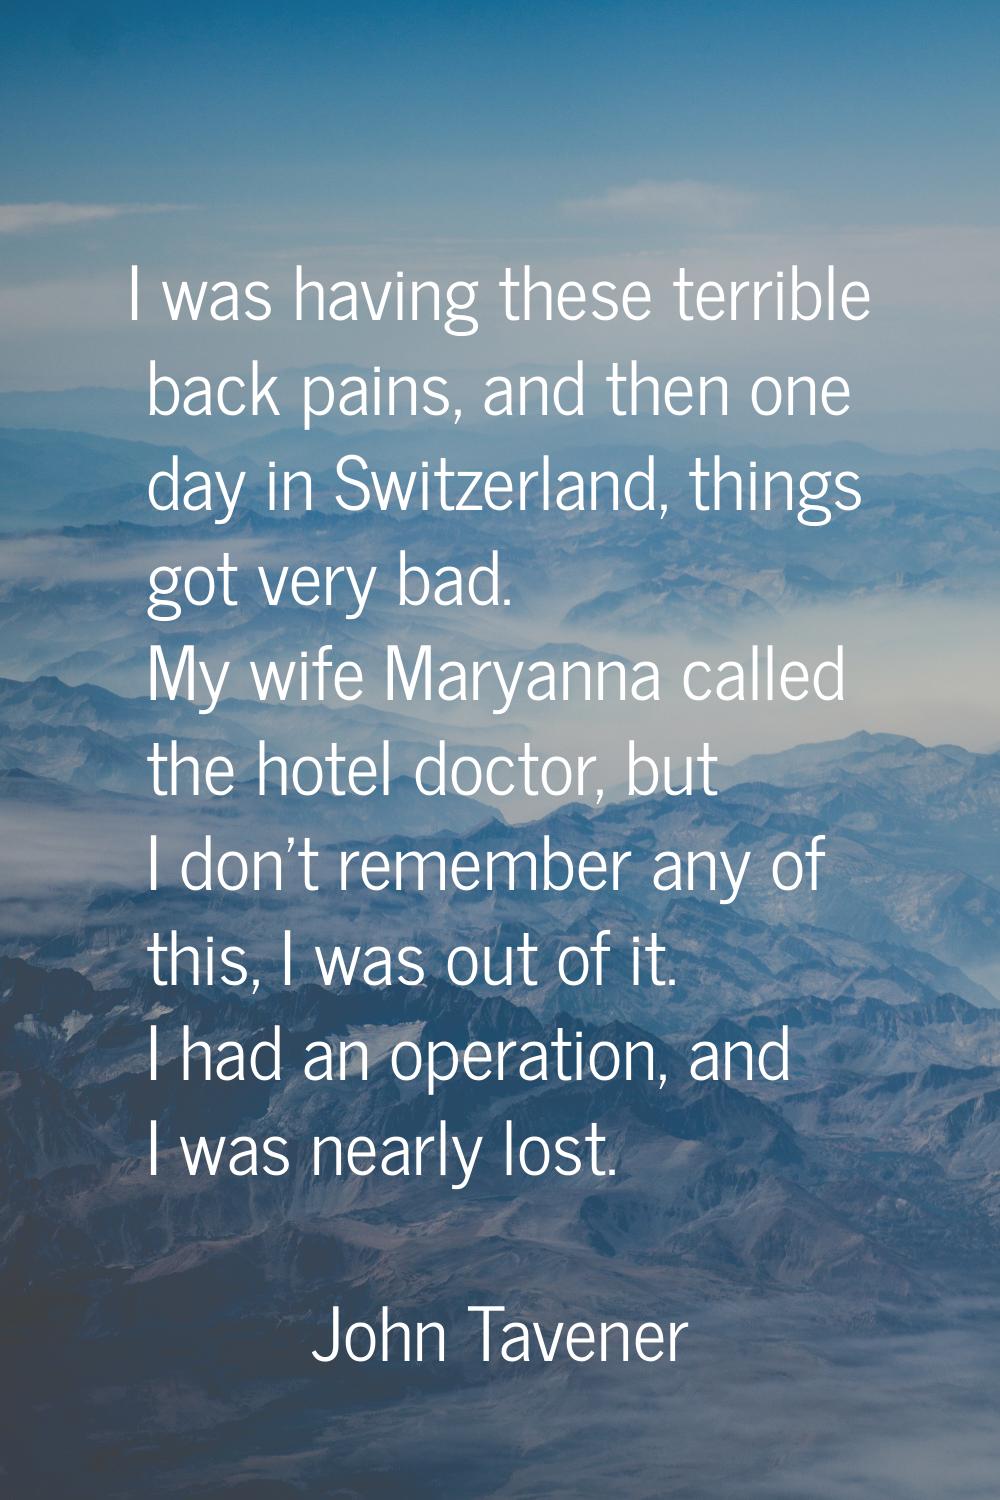 I was having these terrible back pains, and then one day in Switzerland, things got very bad. My wi